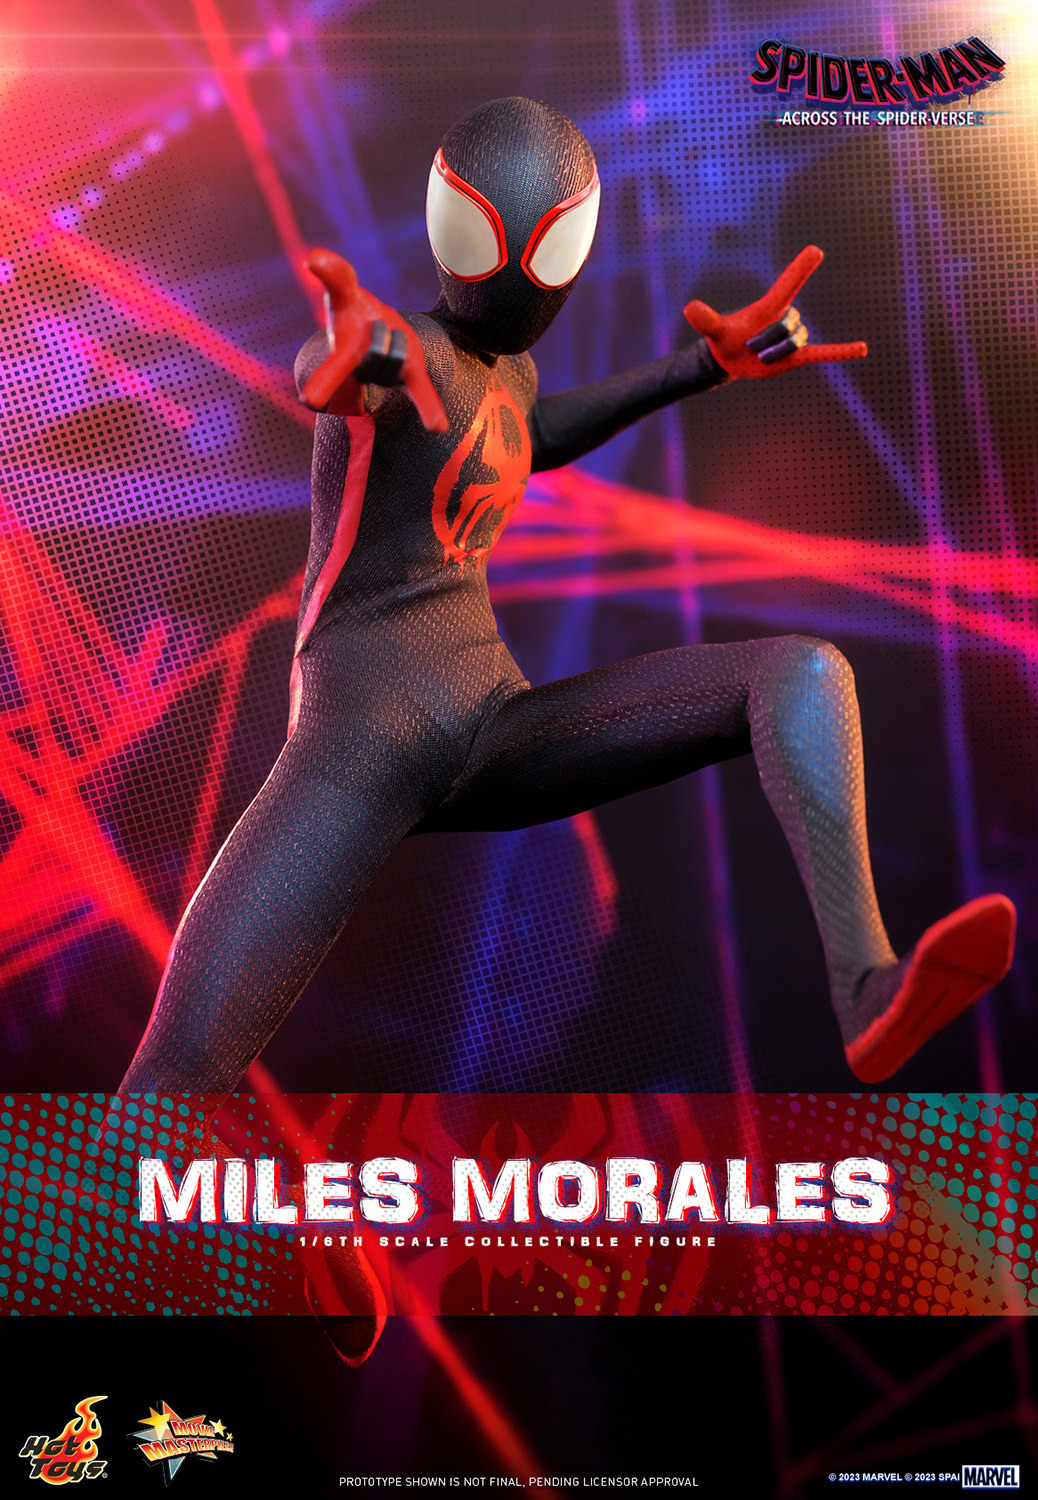 Miles Morales (Special Edition) (Prototype Shown) View 7